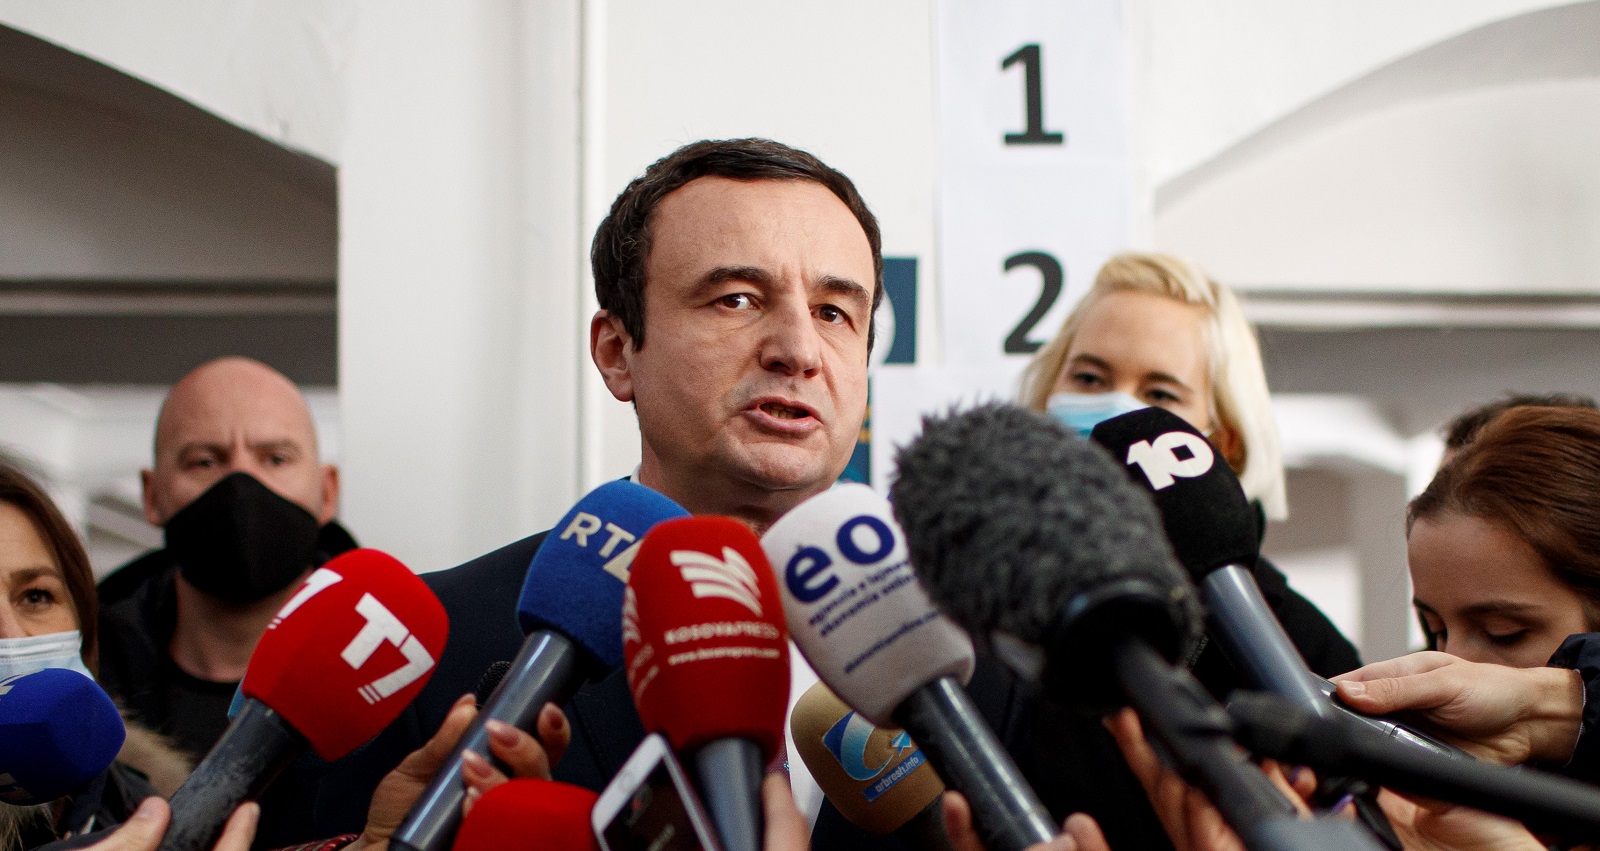 epa09011380 Leader of the movement Self-determination (Vetevendoje) Albin Kurti (C) talks to the media after he voted in the parliamentary elections, in Pristina, Kosovo, 14 February 2021. Kosovo's early parliamentary elections will be held on 14 February 2021. Around 1.8 million voters have the right to cast ballots during snap elections to elect a new 120 seat parliament.  EPA/VALDRIN XHEMAJ